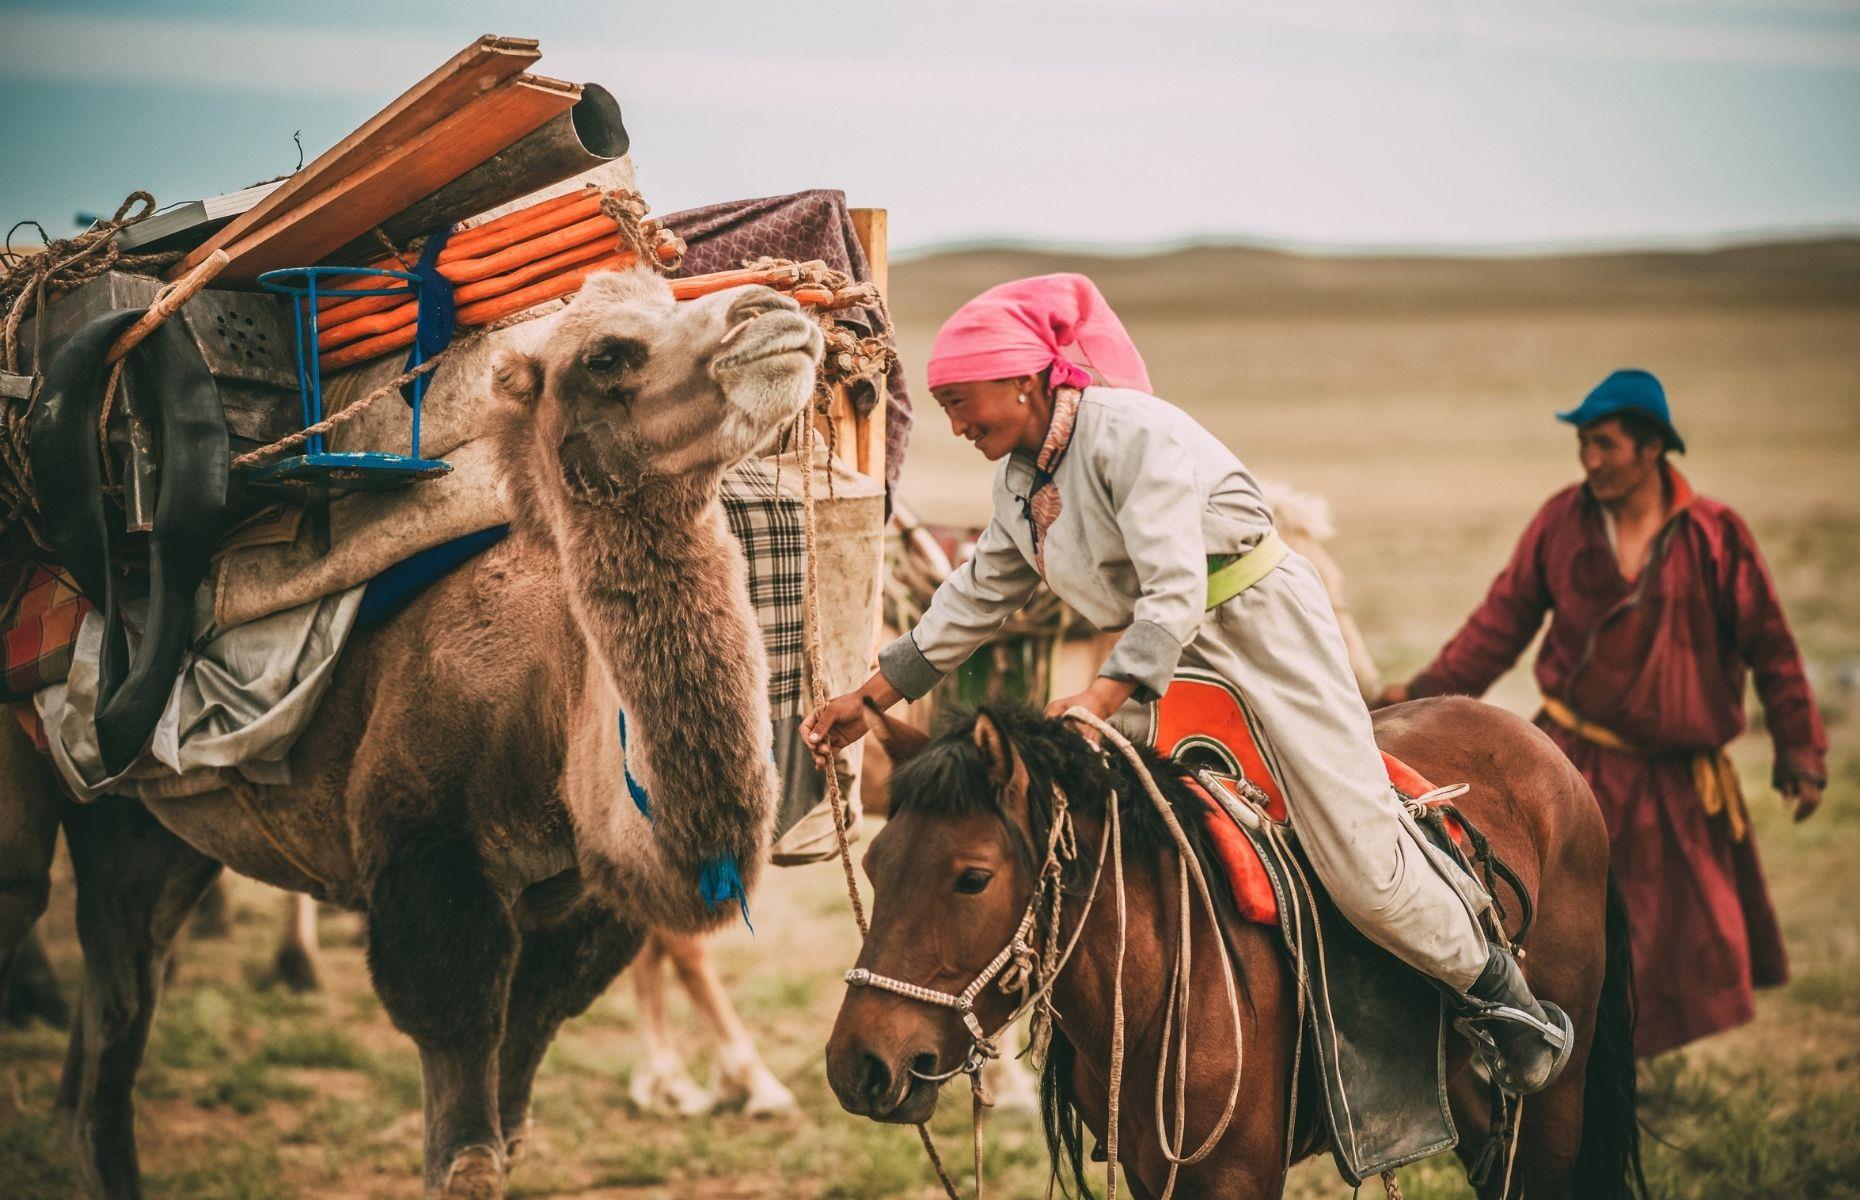 <p>The nomads here typically own 1,000 animals, such as camels, sheep and goats. But sadly, this way of life is under threat. According to <em>The Guardian</em>, around 20% of the country’s people have moved to the capital of Ulaanbaatar in the last three decades, doubling the city’s population. With climate change affecting crops and causing biting winters, nomads are finding it increasingly difficult to raise animals, forcing them to the city in search of an alternative way of life.</p>